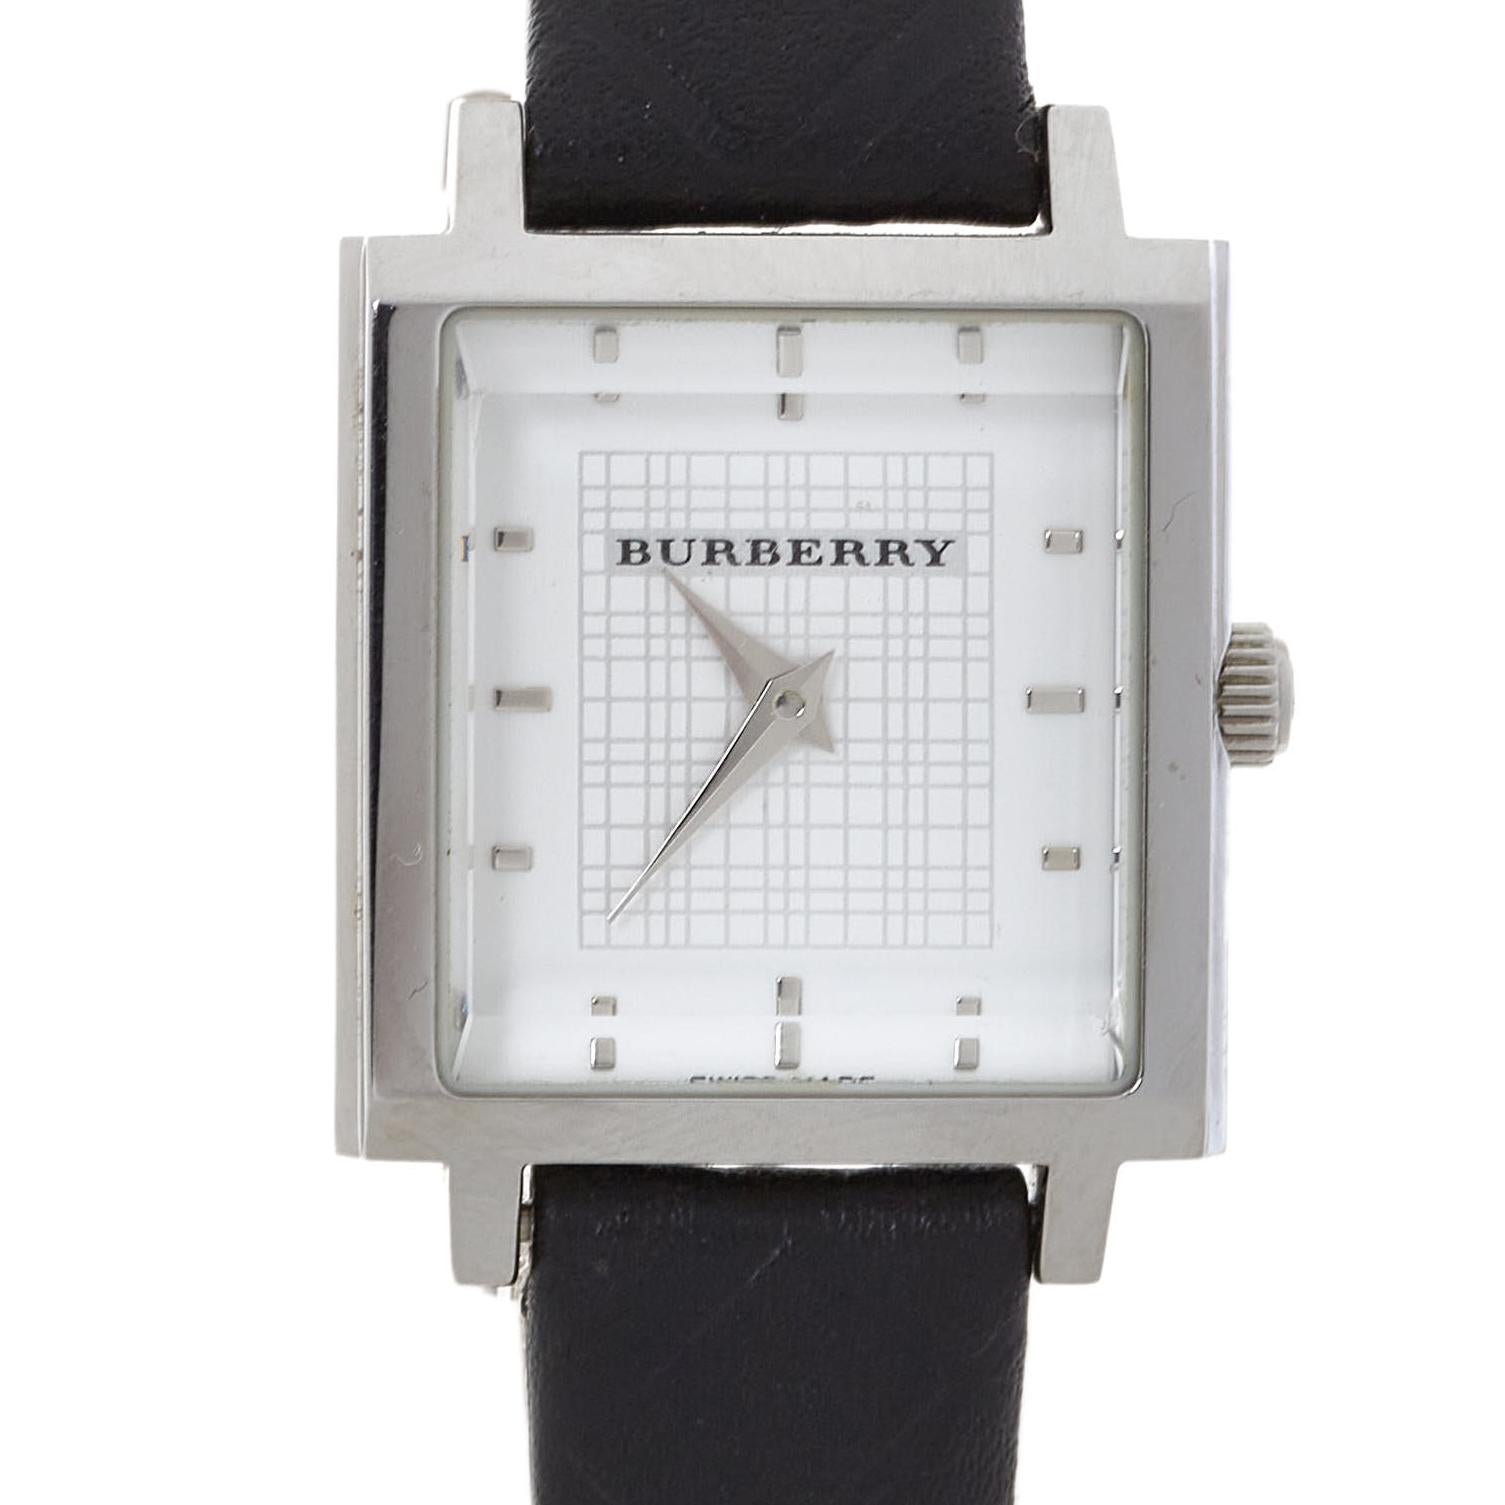 burberry watch women's square face